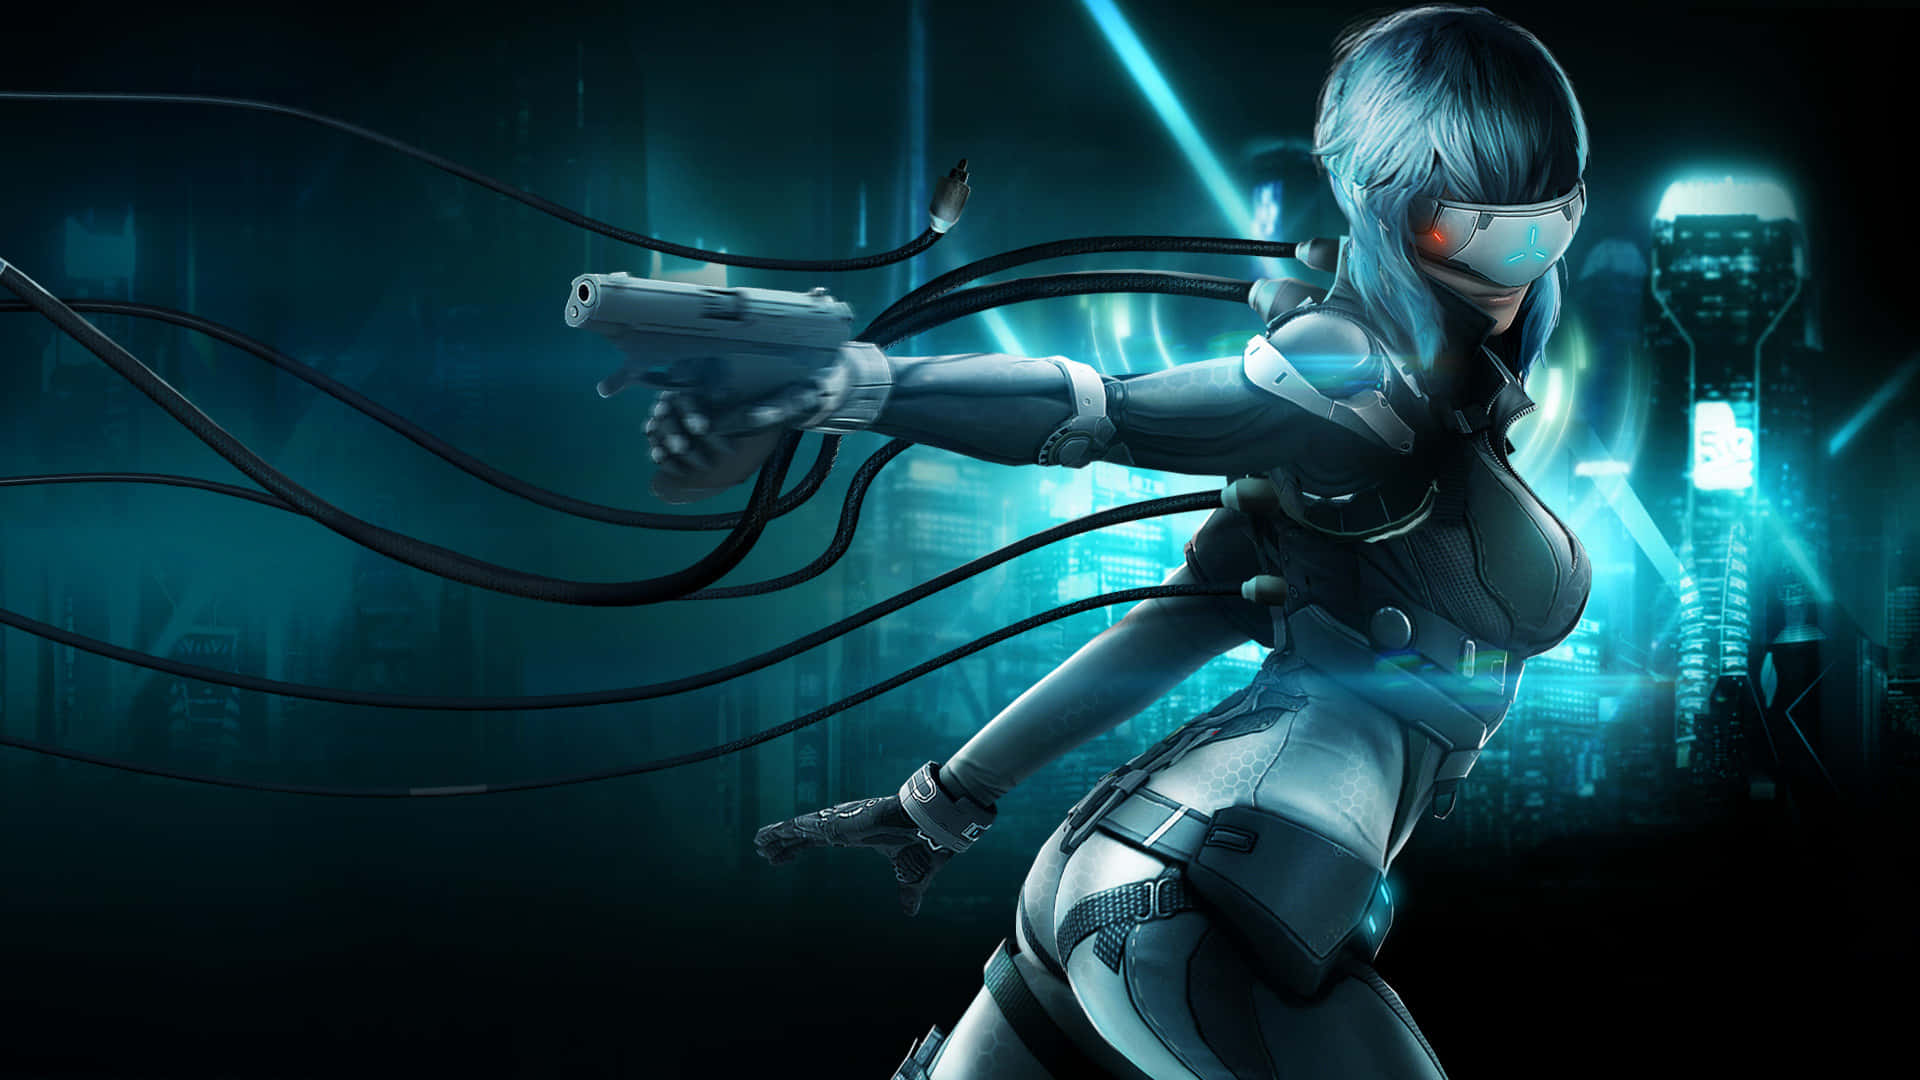 “Ghost in the Shell Logicoma in action!” Wallpaper